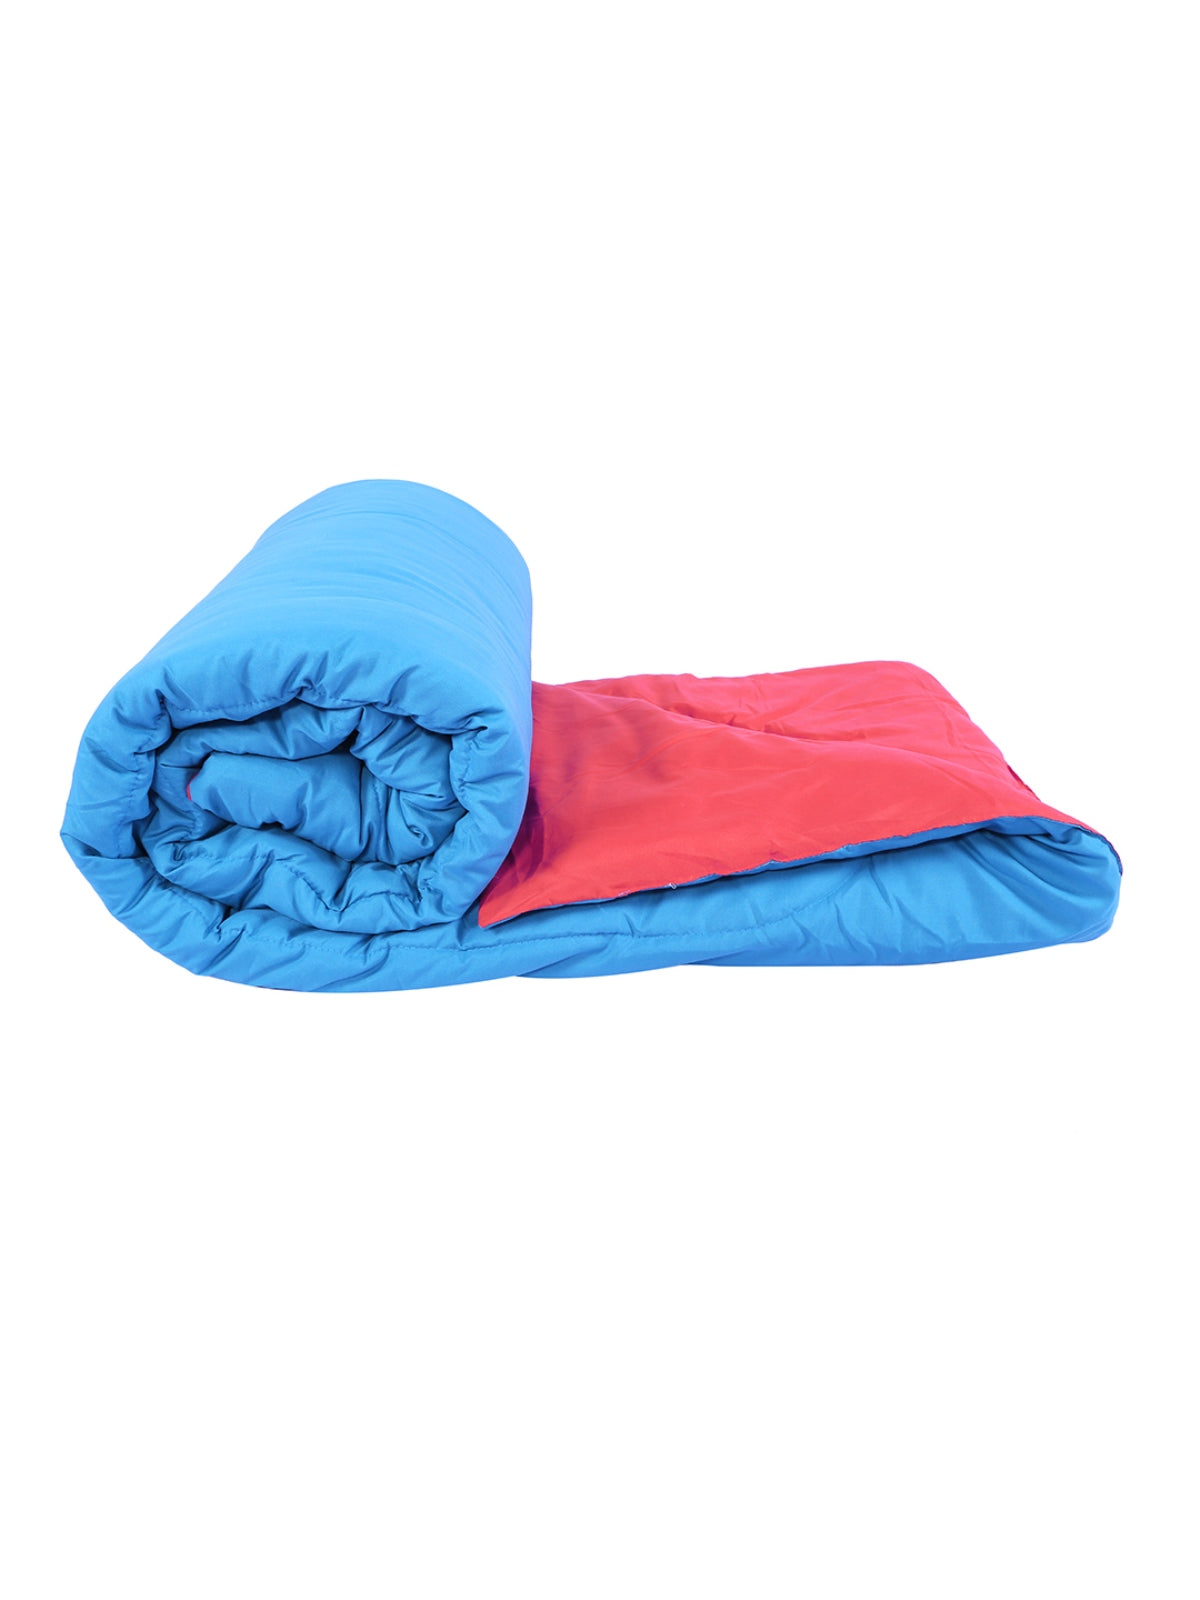 Solid 200 GSM Reversible AC Comforter for Double Bed - Blue & Pink